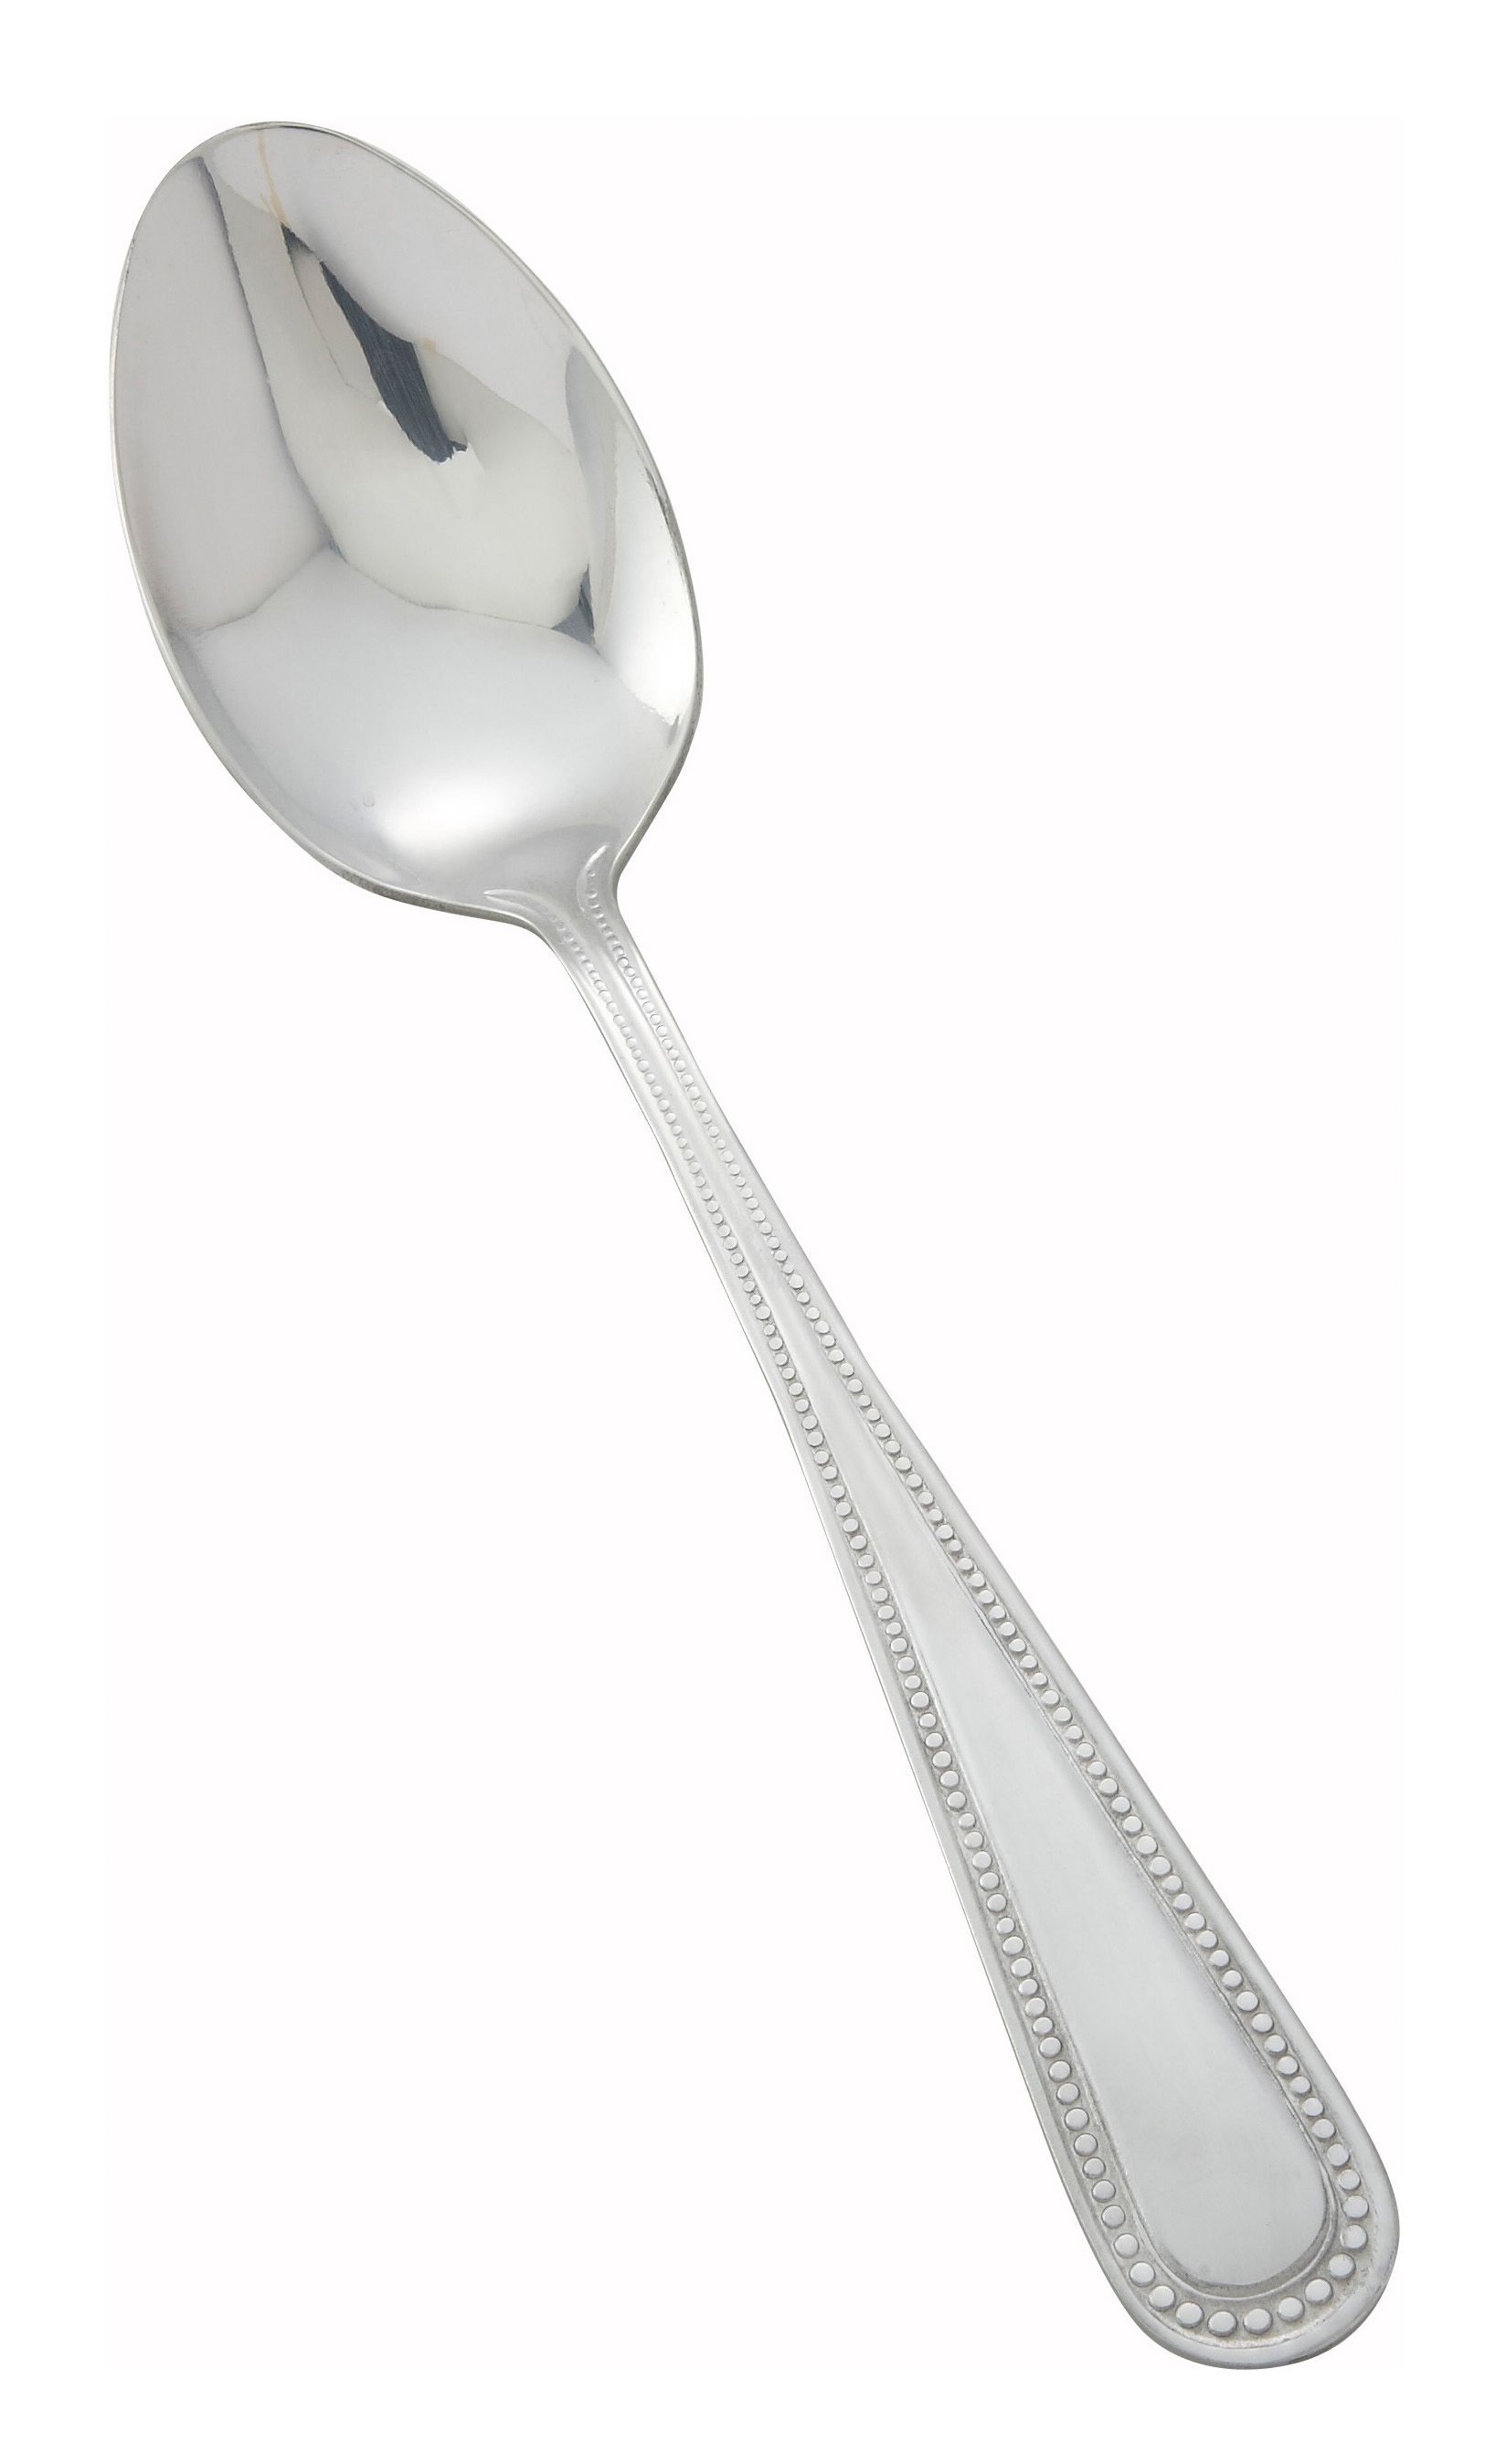 Winco 0005-10 Dots Heavy Weight Mirror Finish Stainless Steel Table Spoon (12/Pack)